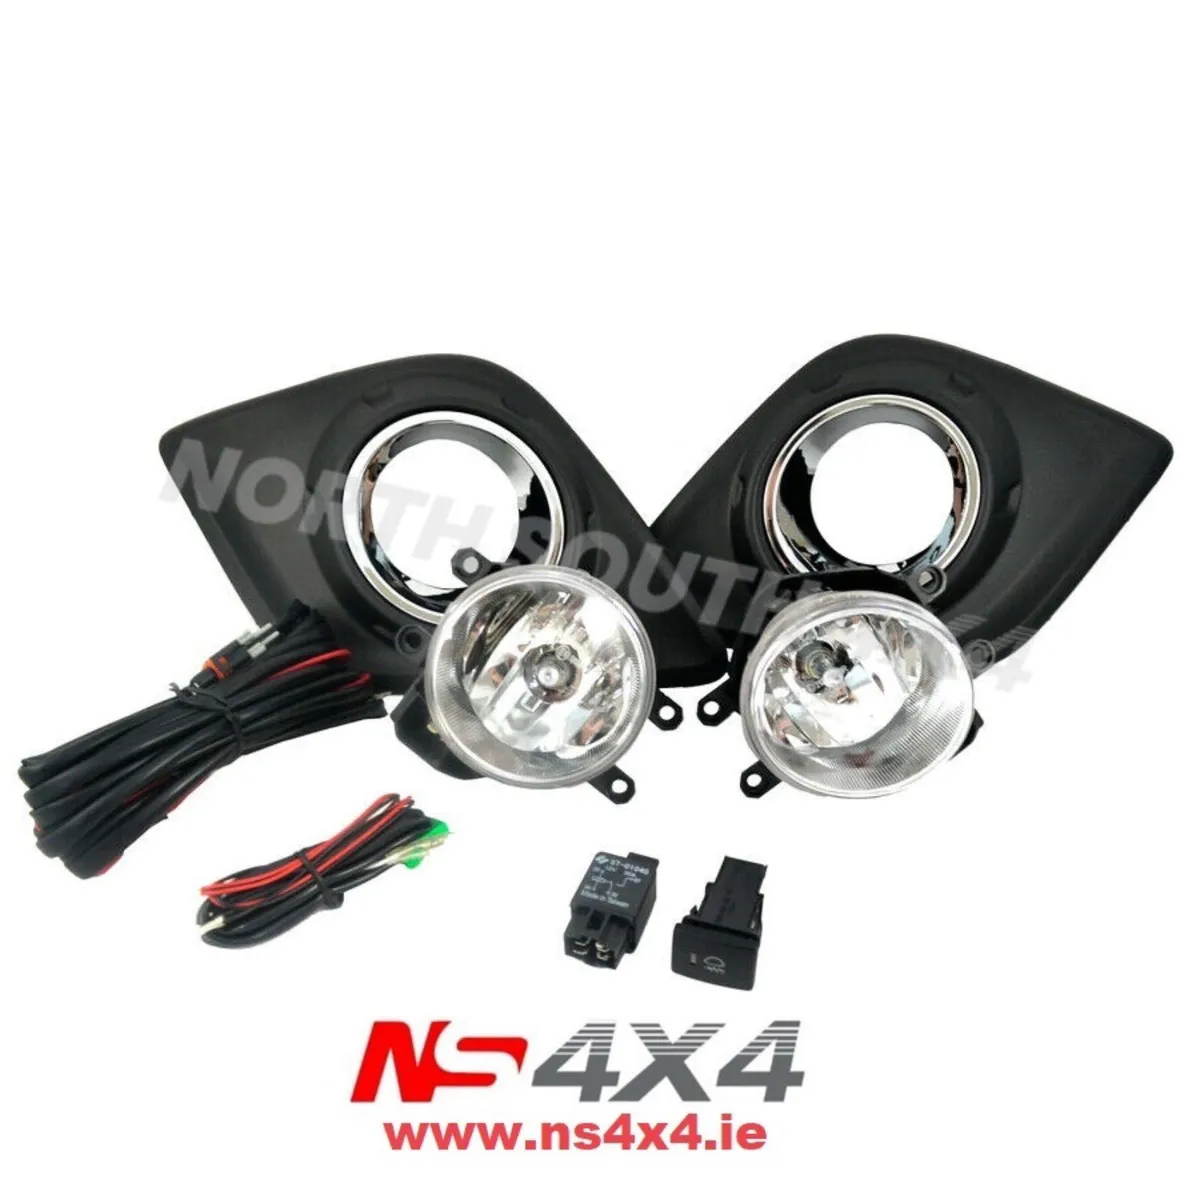 Toyota Hilux fog lamp kits// all spares